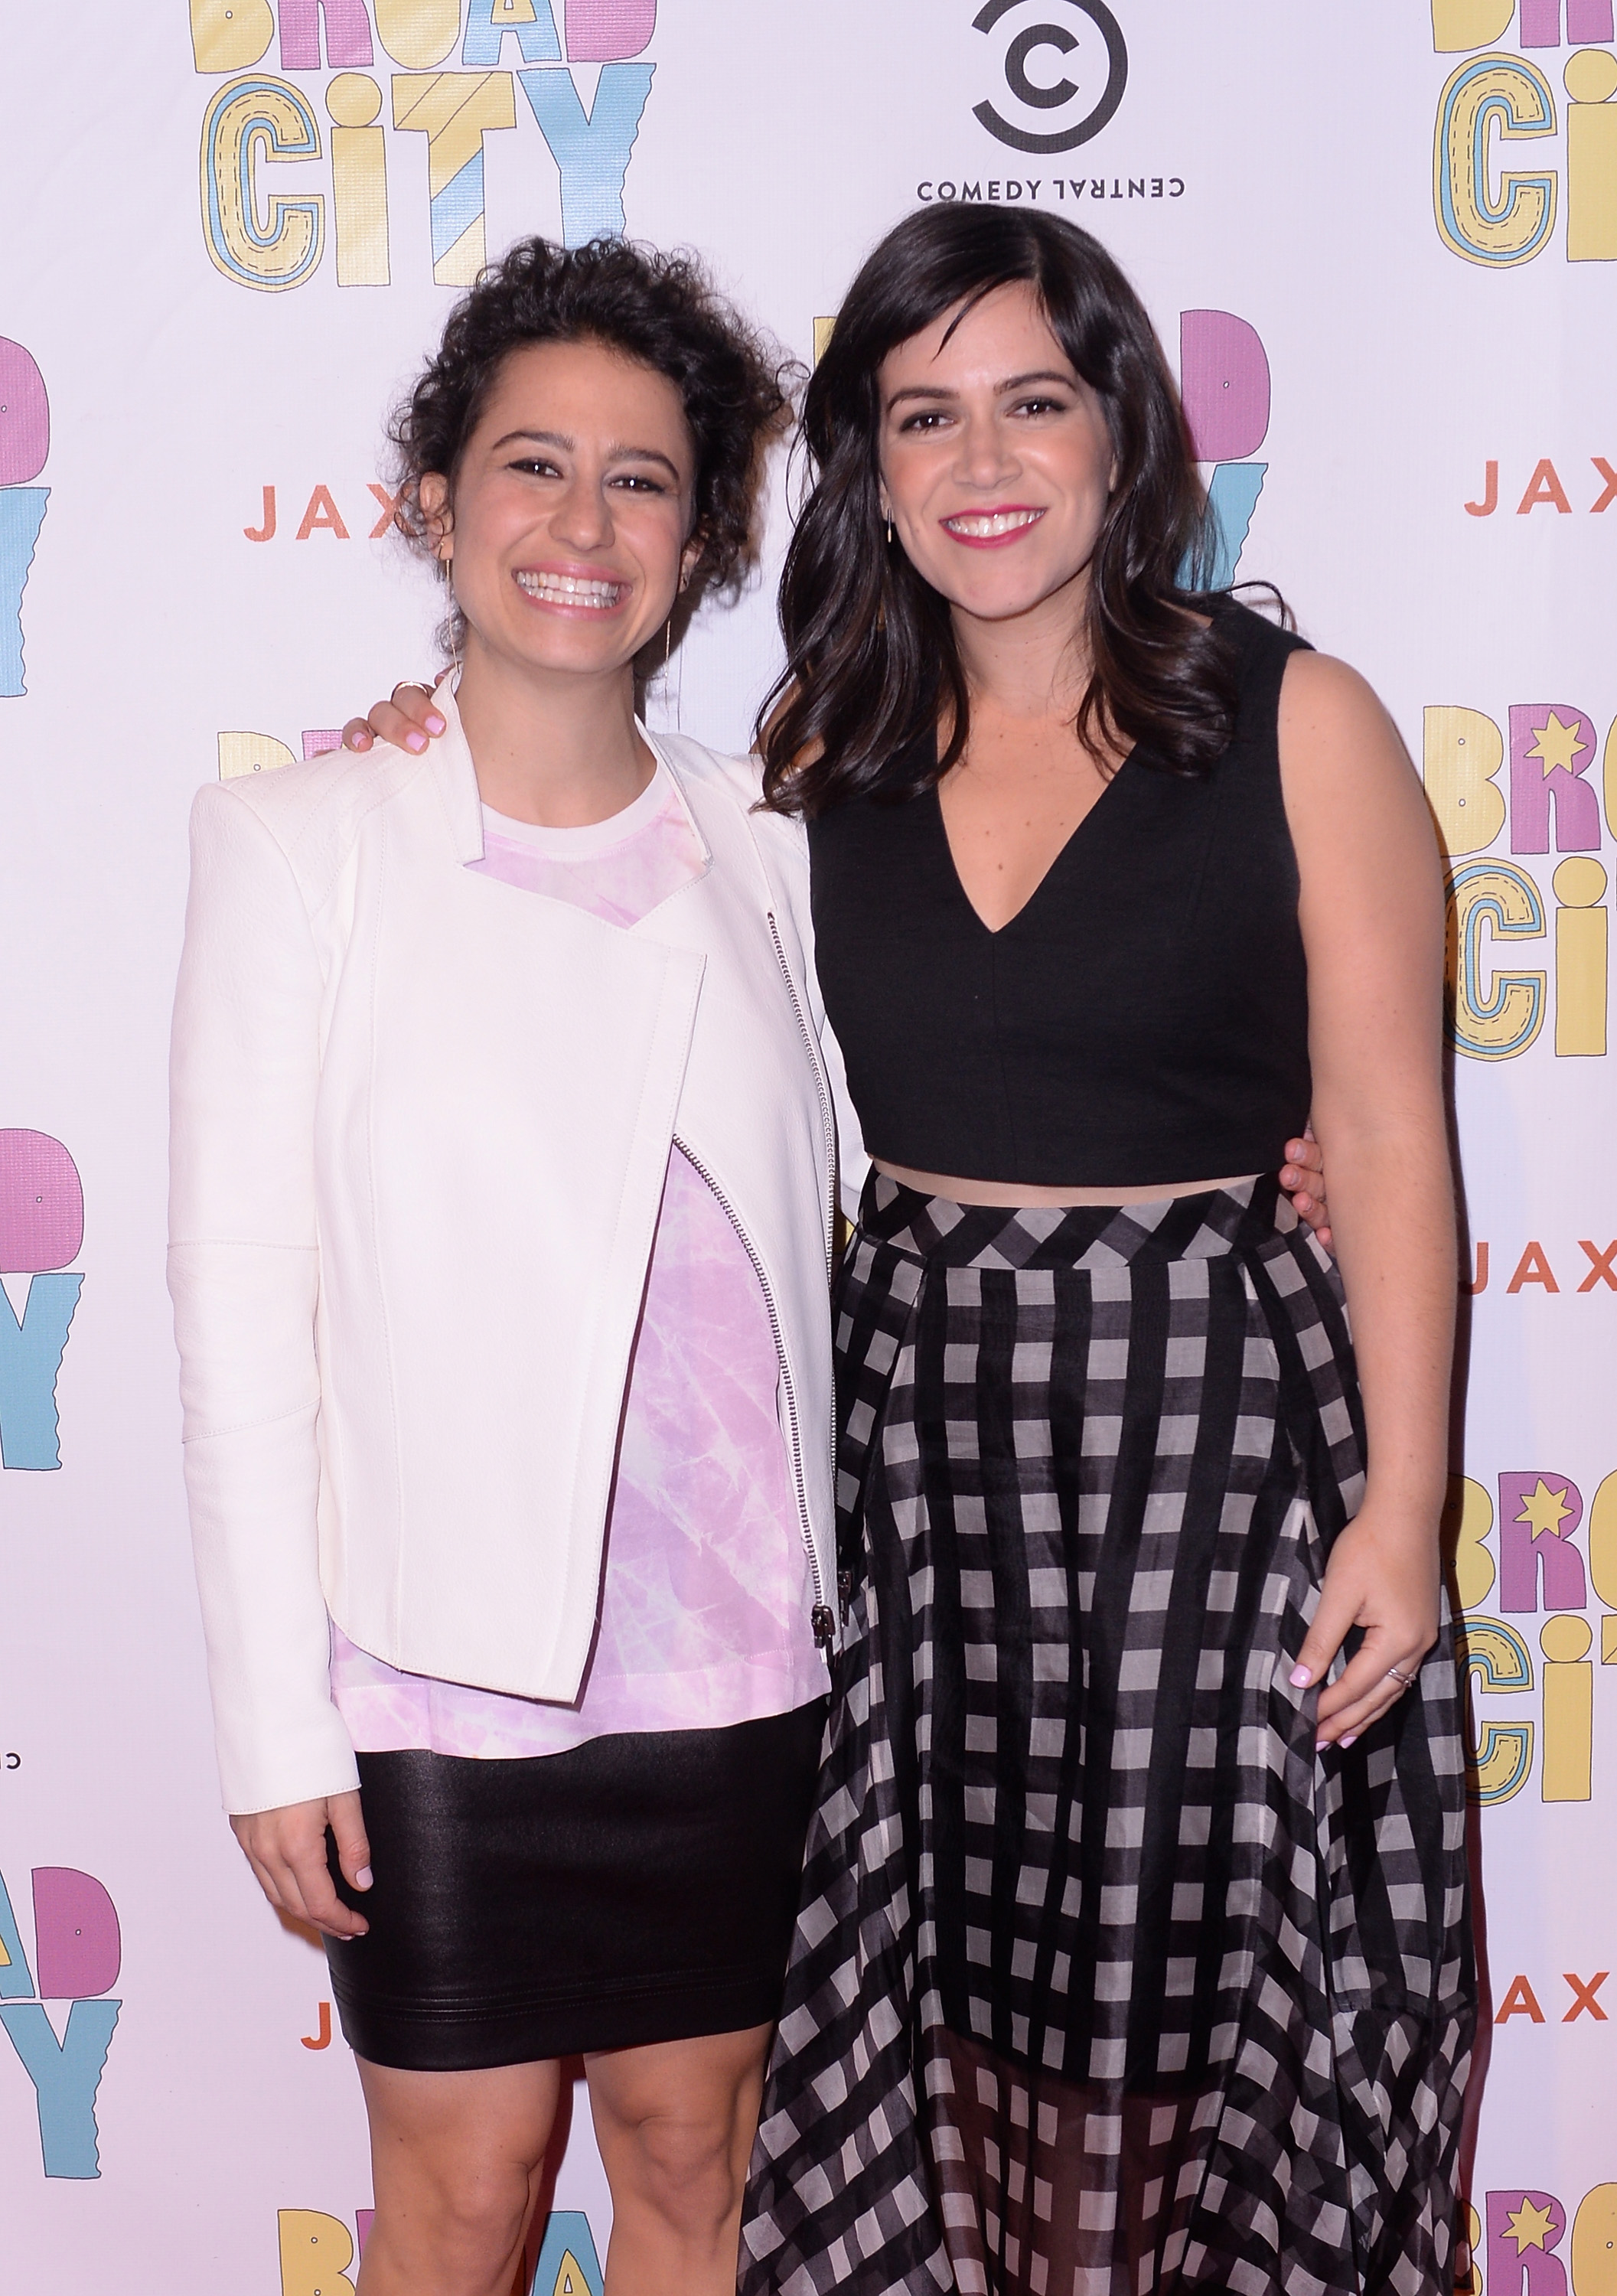 Actresses/writers Ilana Glazer and Abbi Jacobson attend The Broad City Season 2 Premiere Party on January 7, 2015 in New York City.  (Stephen Lovekin--Getty Images for Comedy Central) (Stephen Lovekin&amp;mdash;Getty Images for Comedy Central)